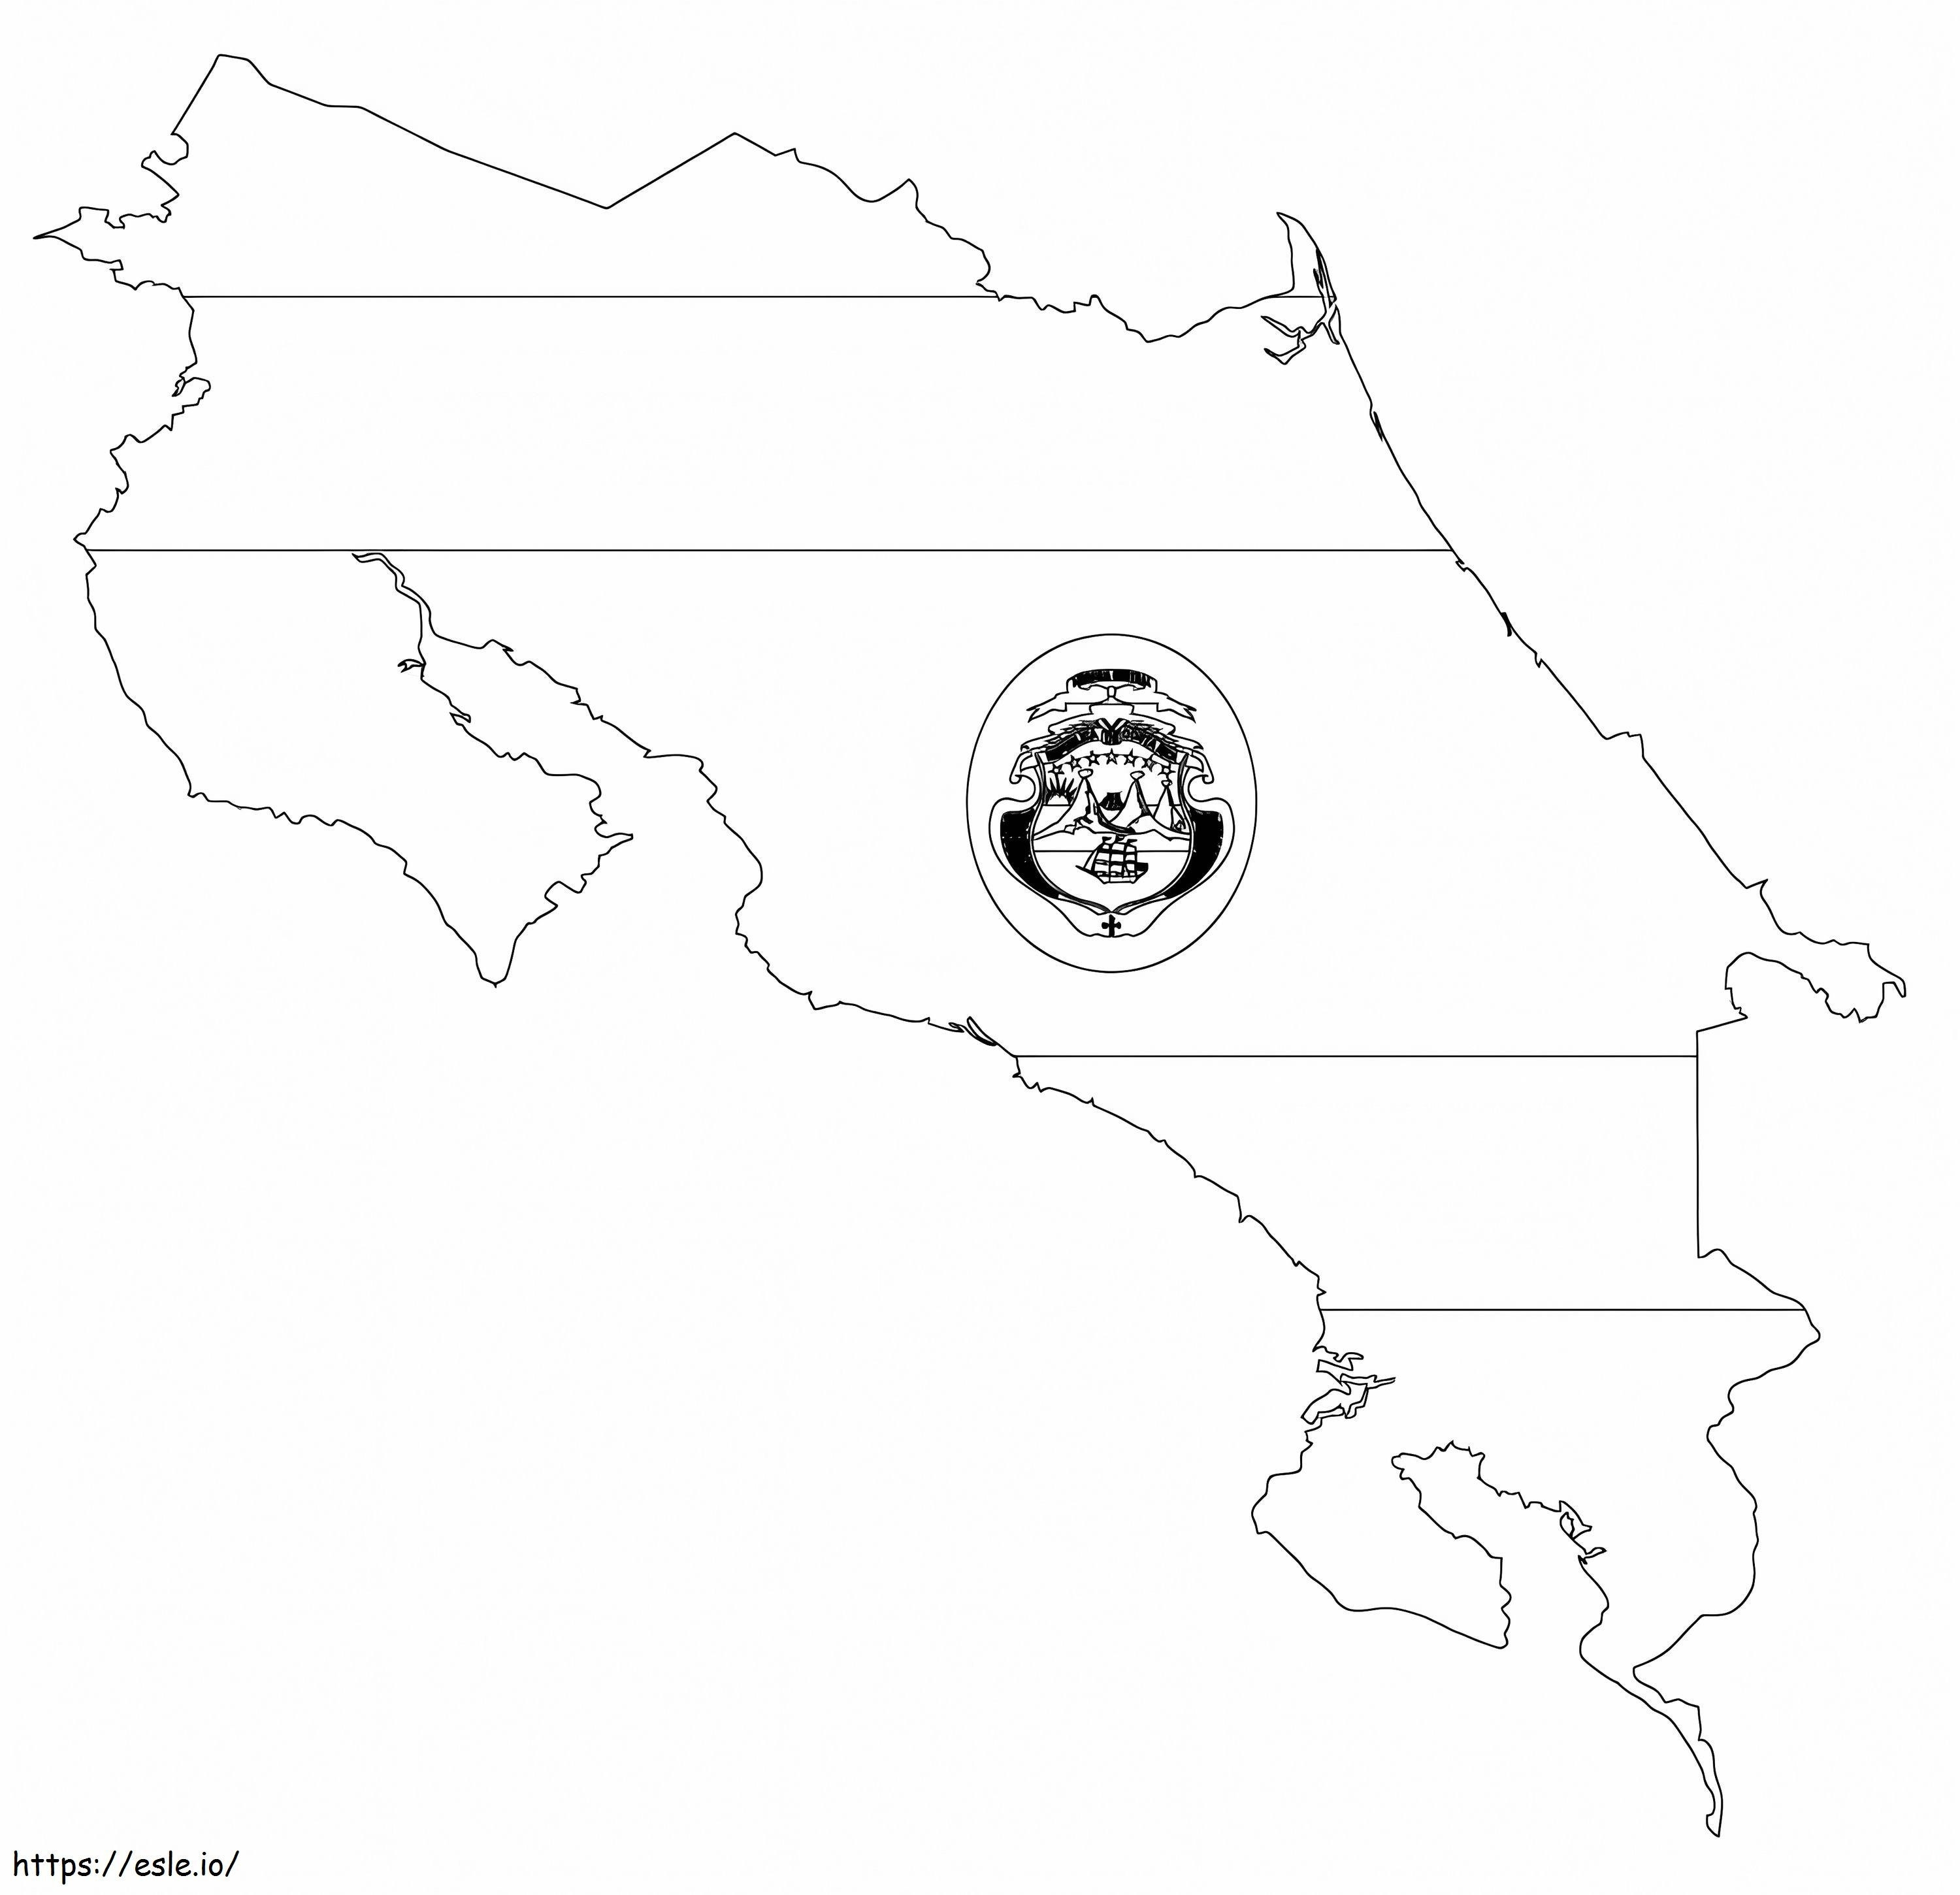 Costa Rica Flag And Map coloring page